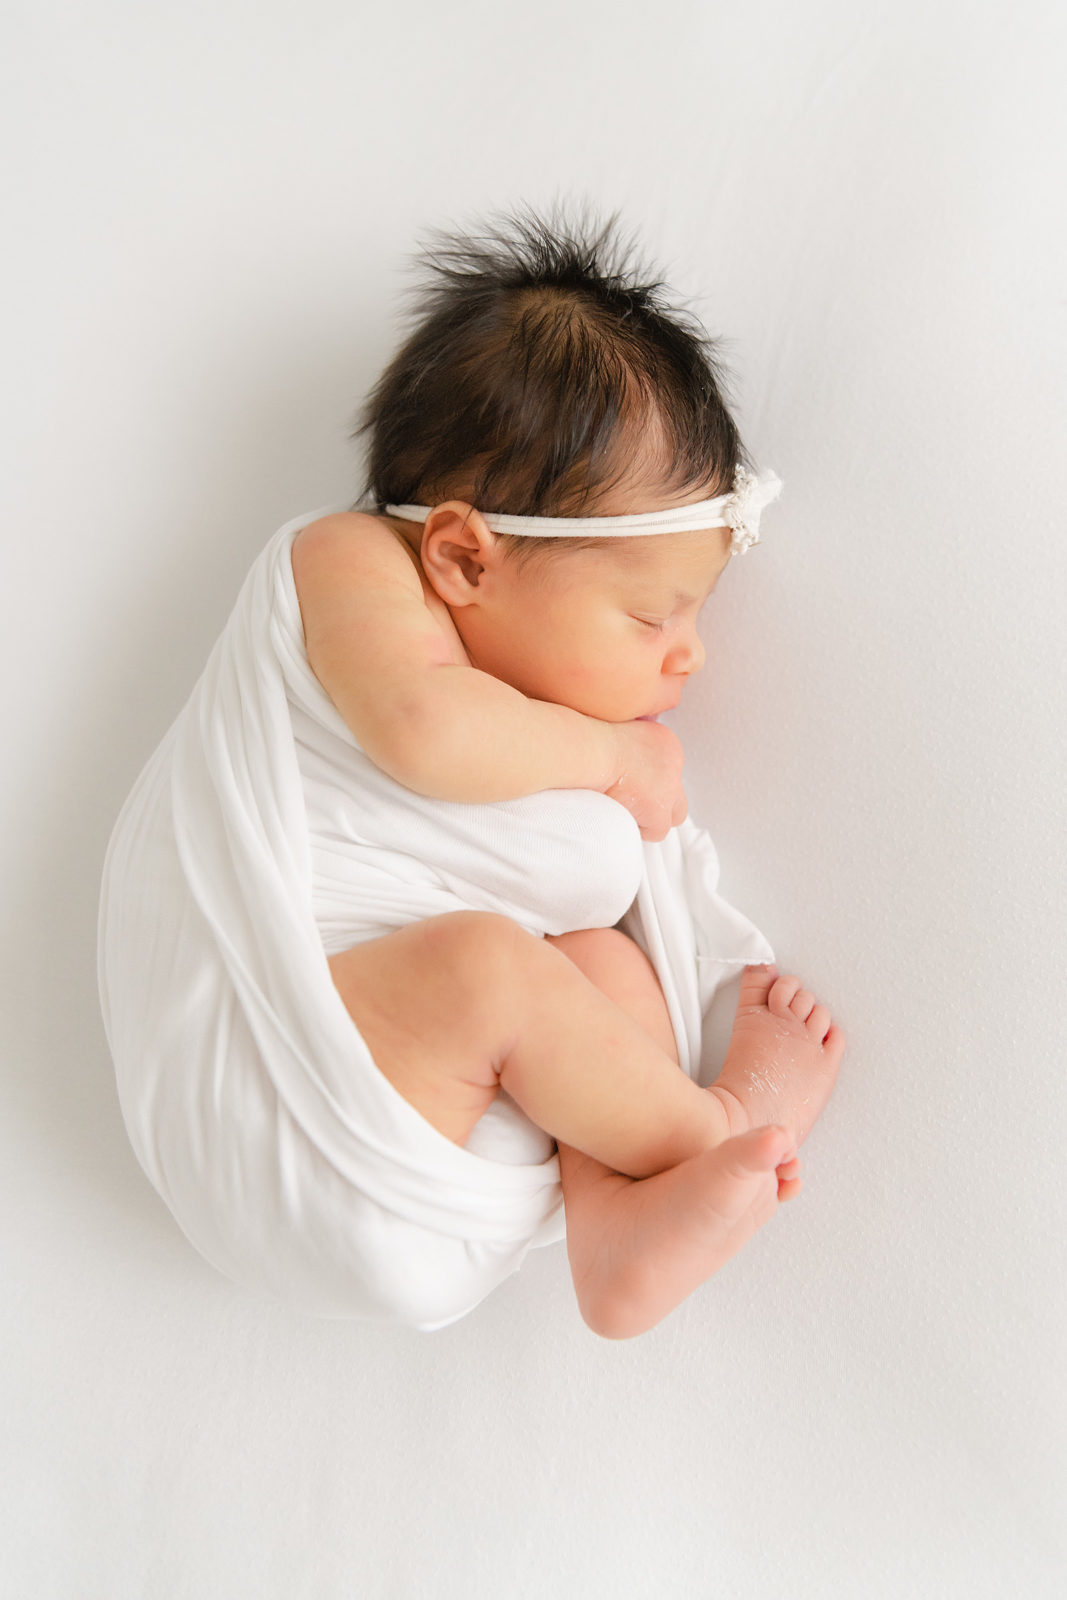 a newborn baby curled up on a white blanket